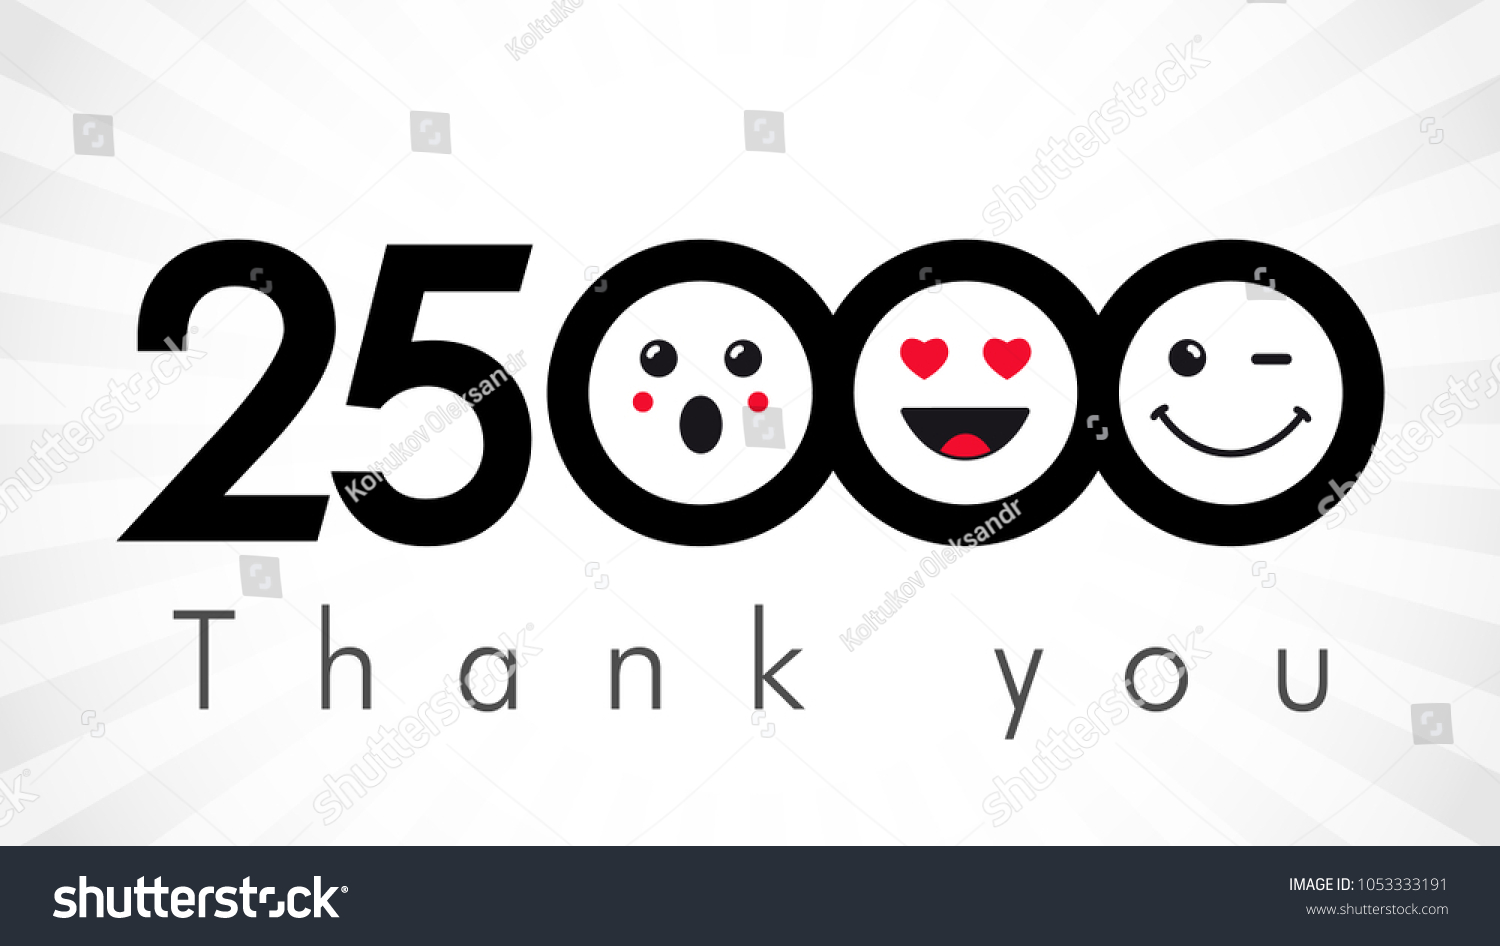 SVG of Thank you 25000 followers numbers. Congratulating black and white networking thanks, net friends image in two 2 colors, customers 25 000 likes, or % percent off discount. Round isolated smiling people svg